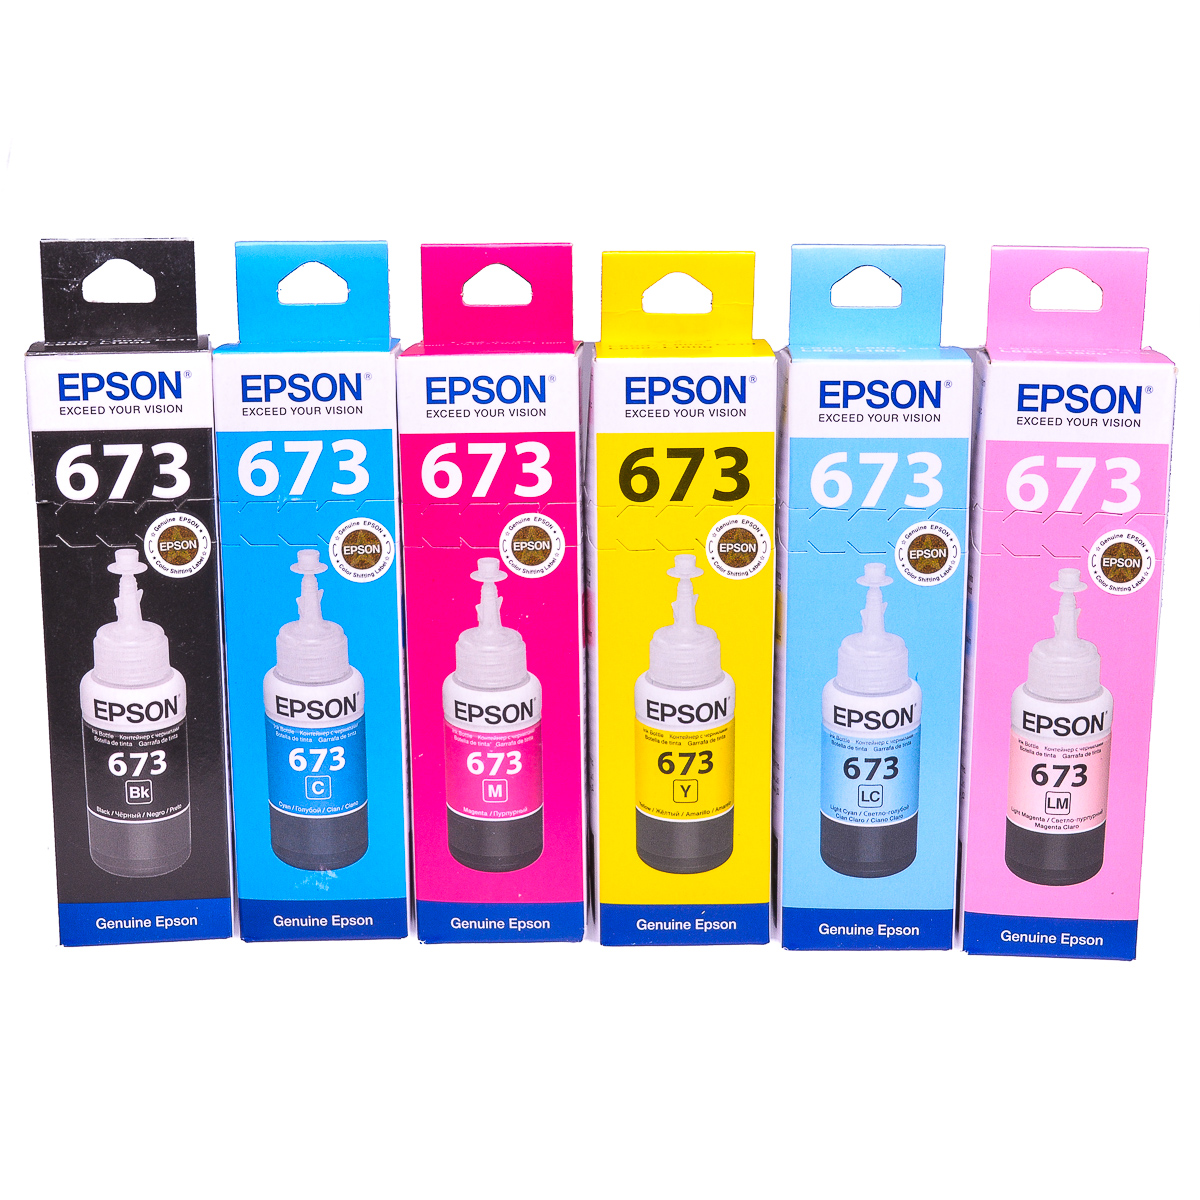 Genuine Multipack ink refill for use with Epson L800 printer